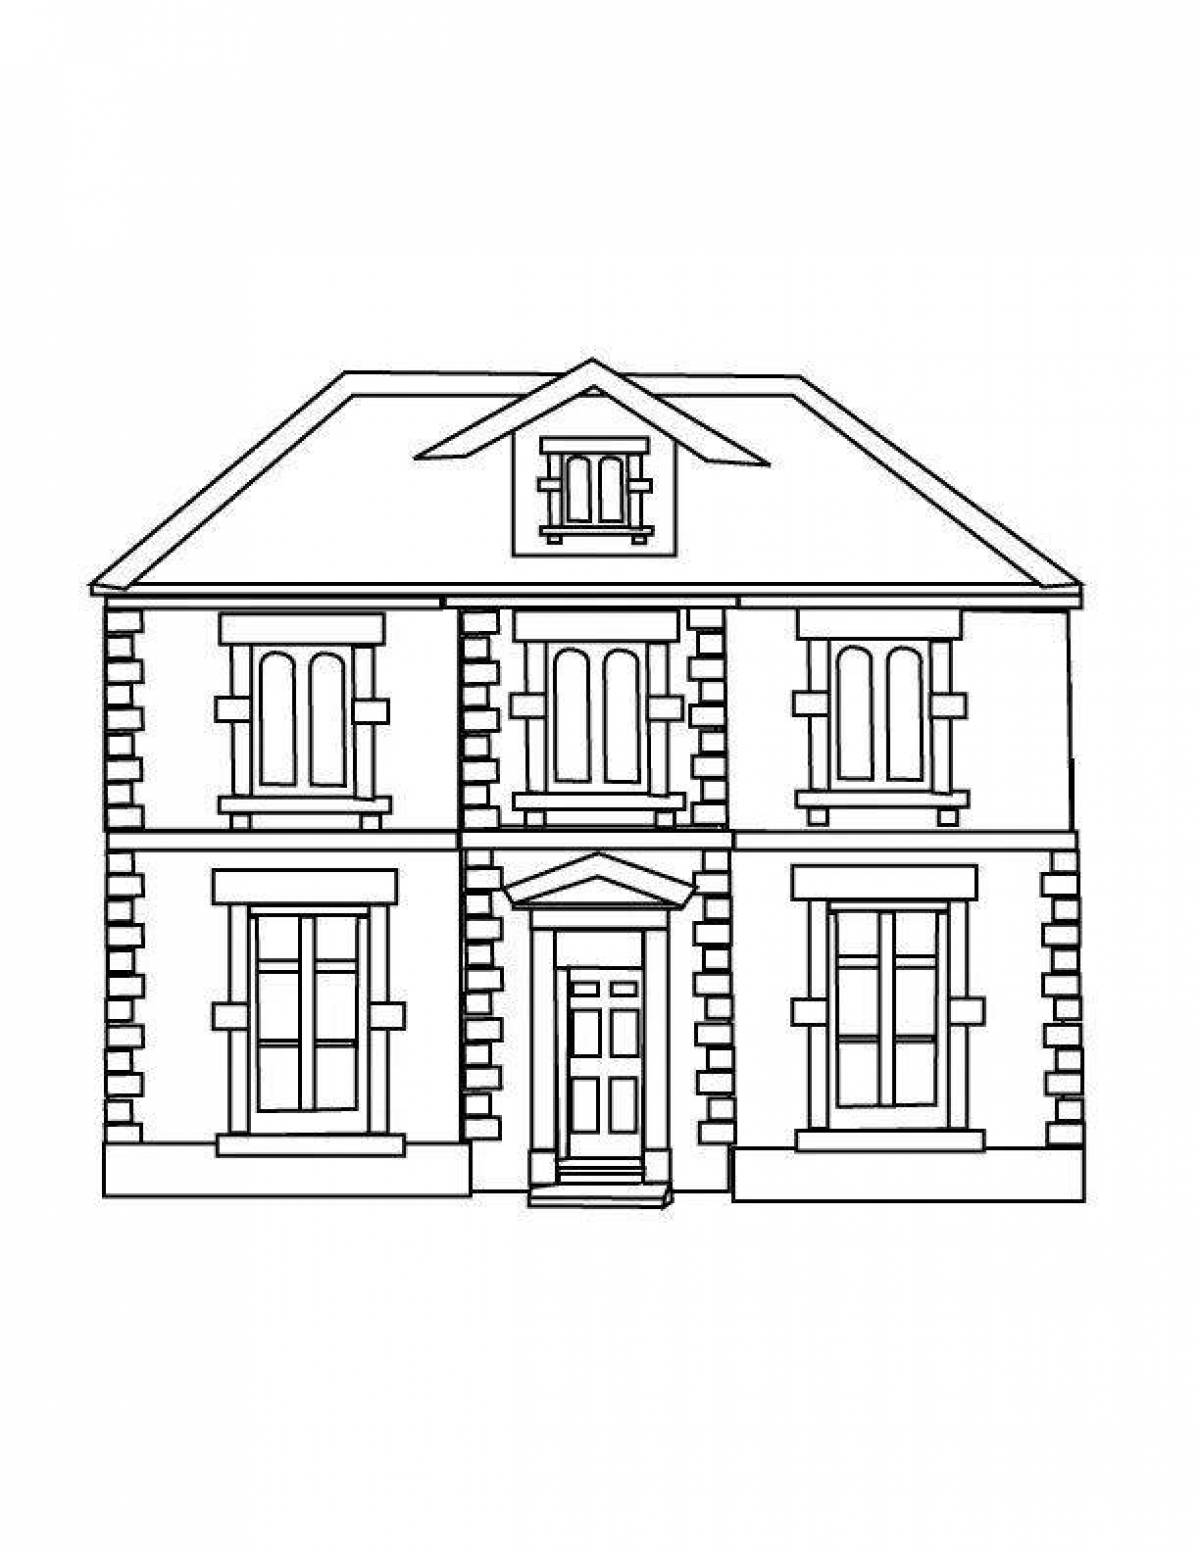 Coloring book of an intriguing two-storey house